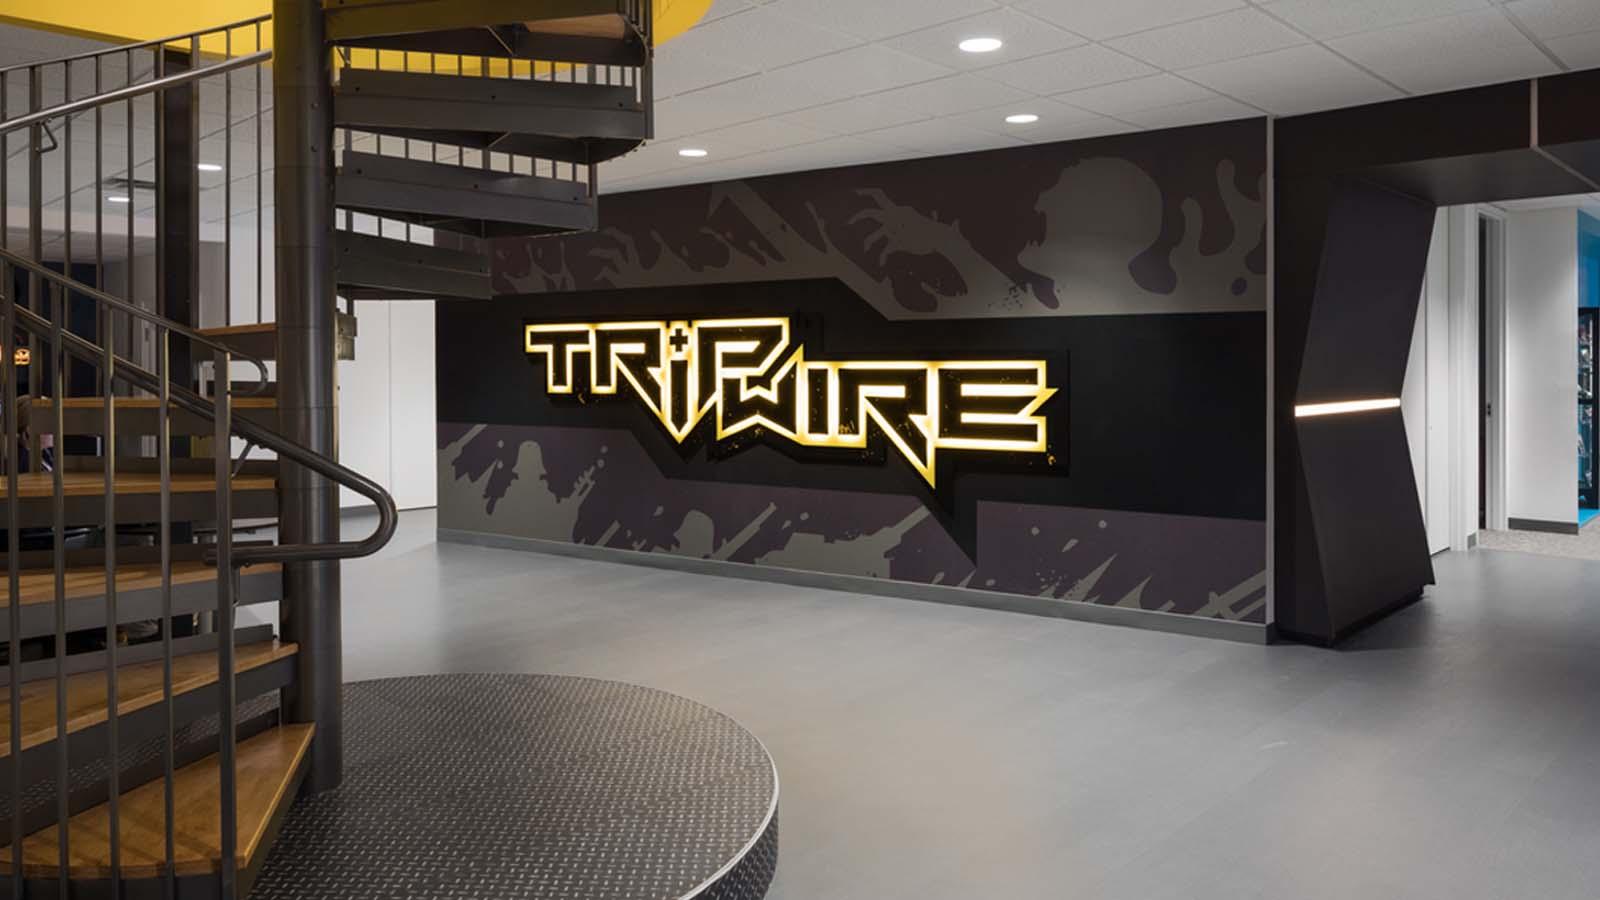 My interview with John Gibson, CEO of Tripwire Interactive - Band of Geeks